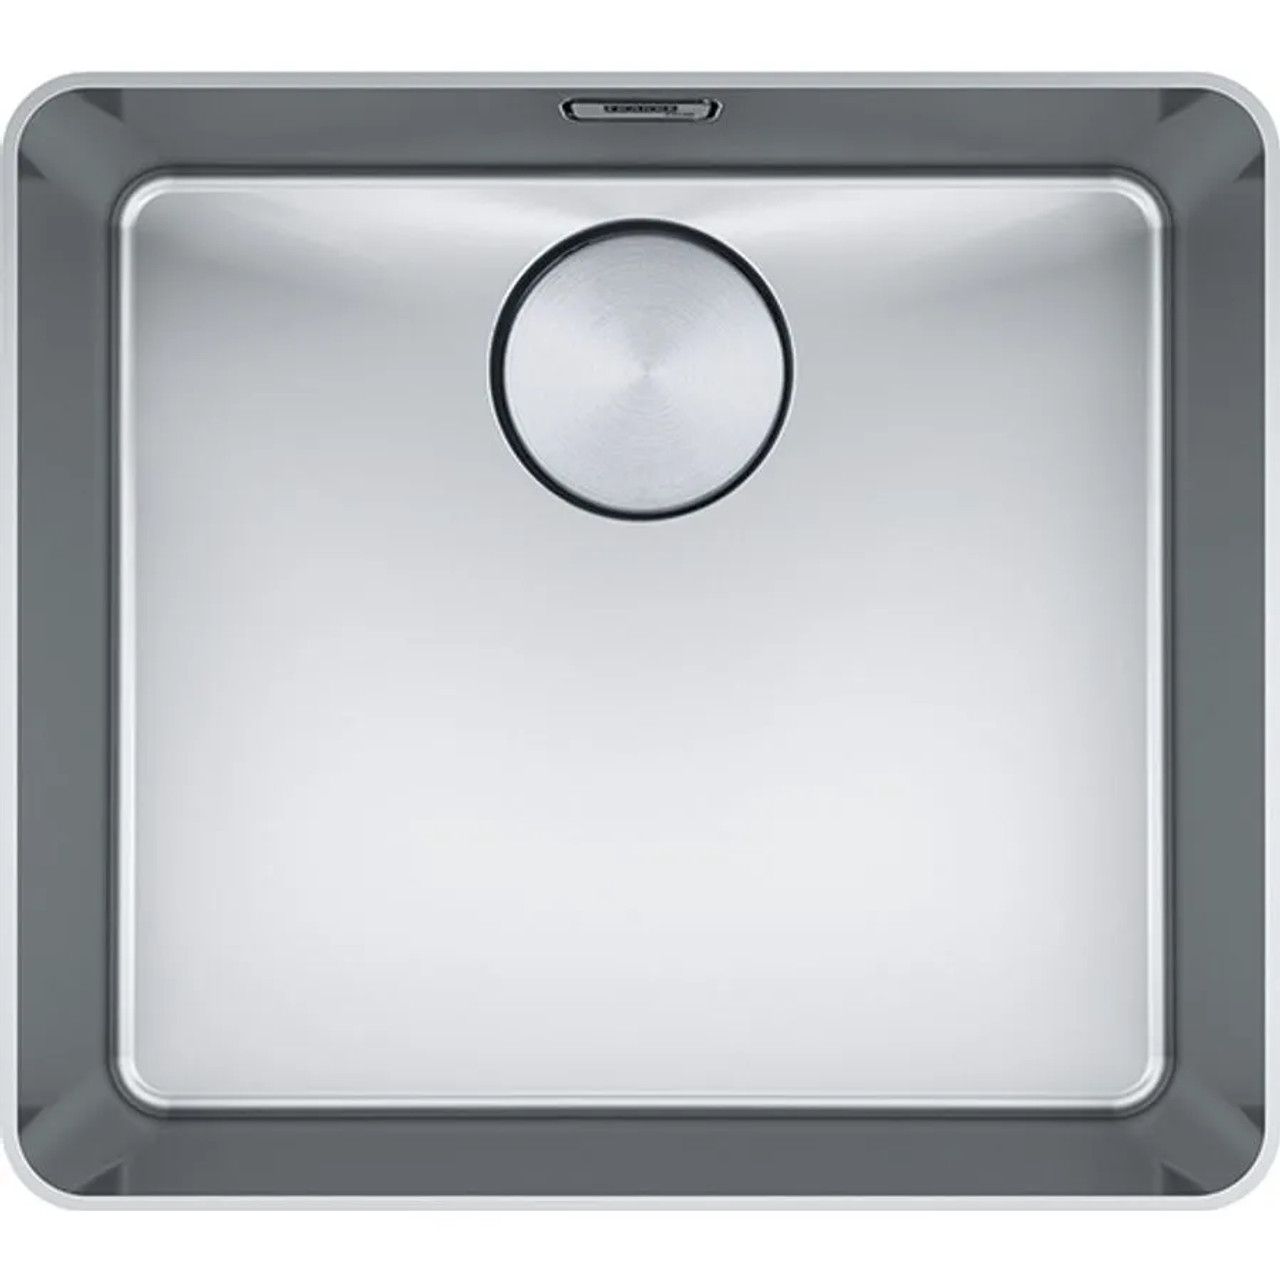 MYX21045FPC – Mythos Single Bowl Sink – Stainless Steel	